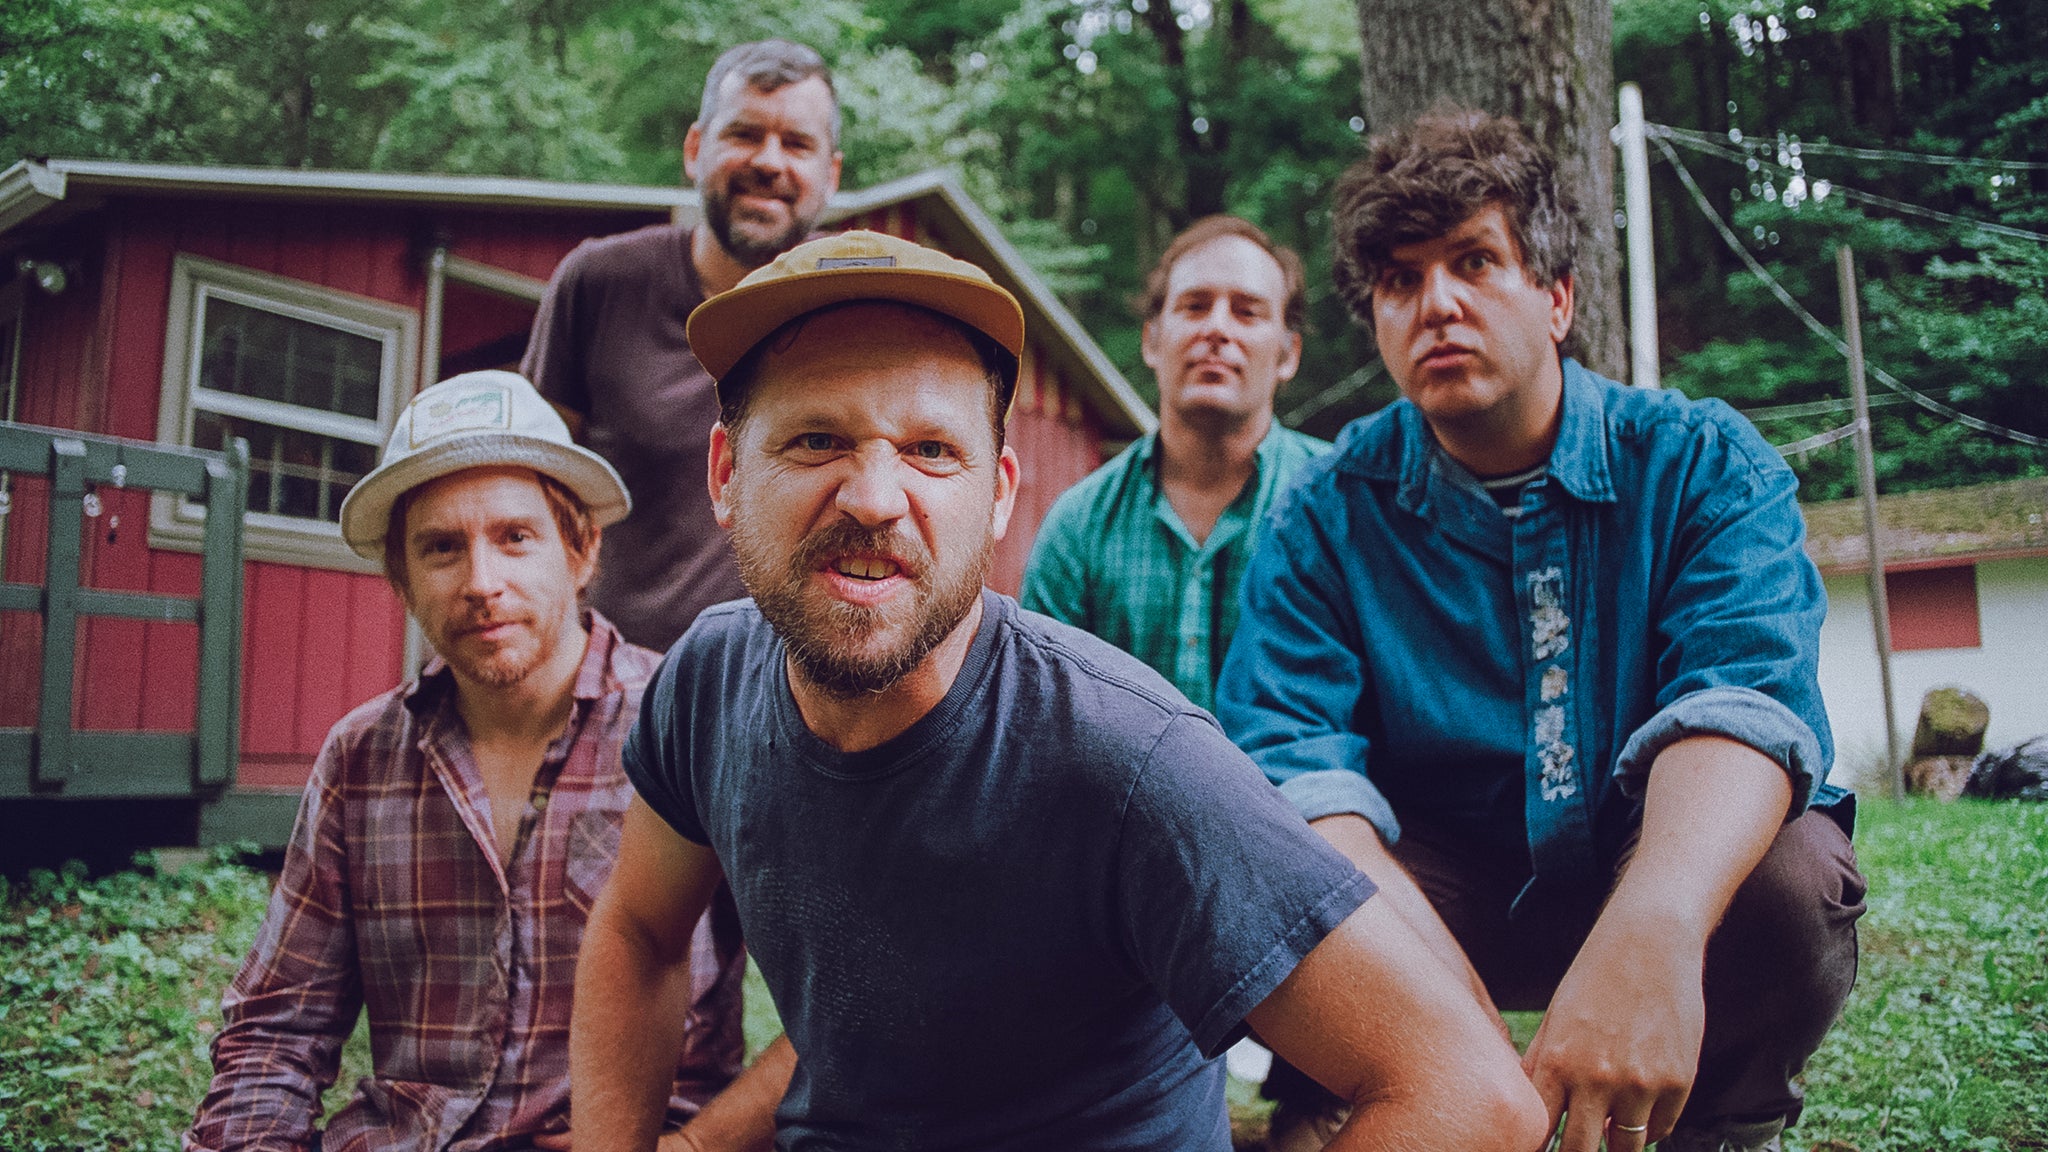 WXPN Welcomes Dr. Dog 